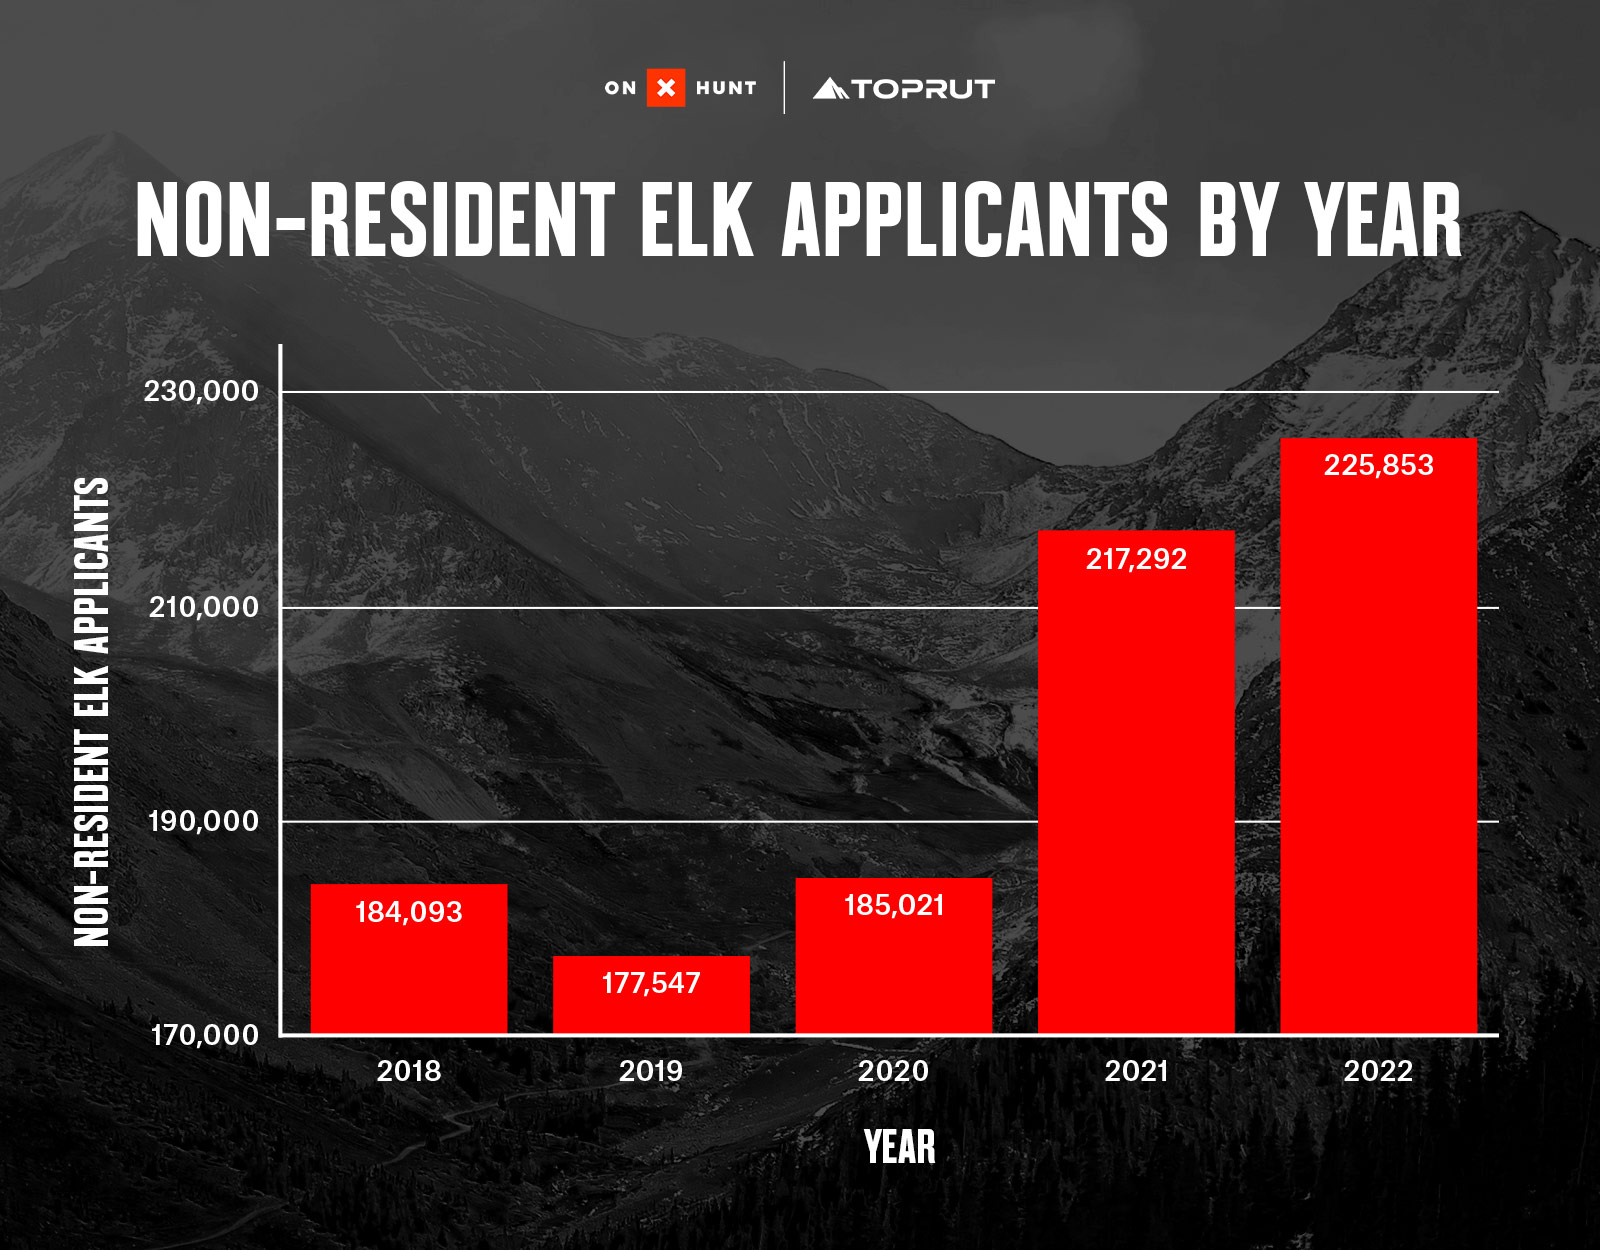 non-resident elk applications by year, toprut draw odds